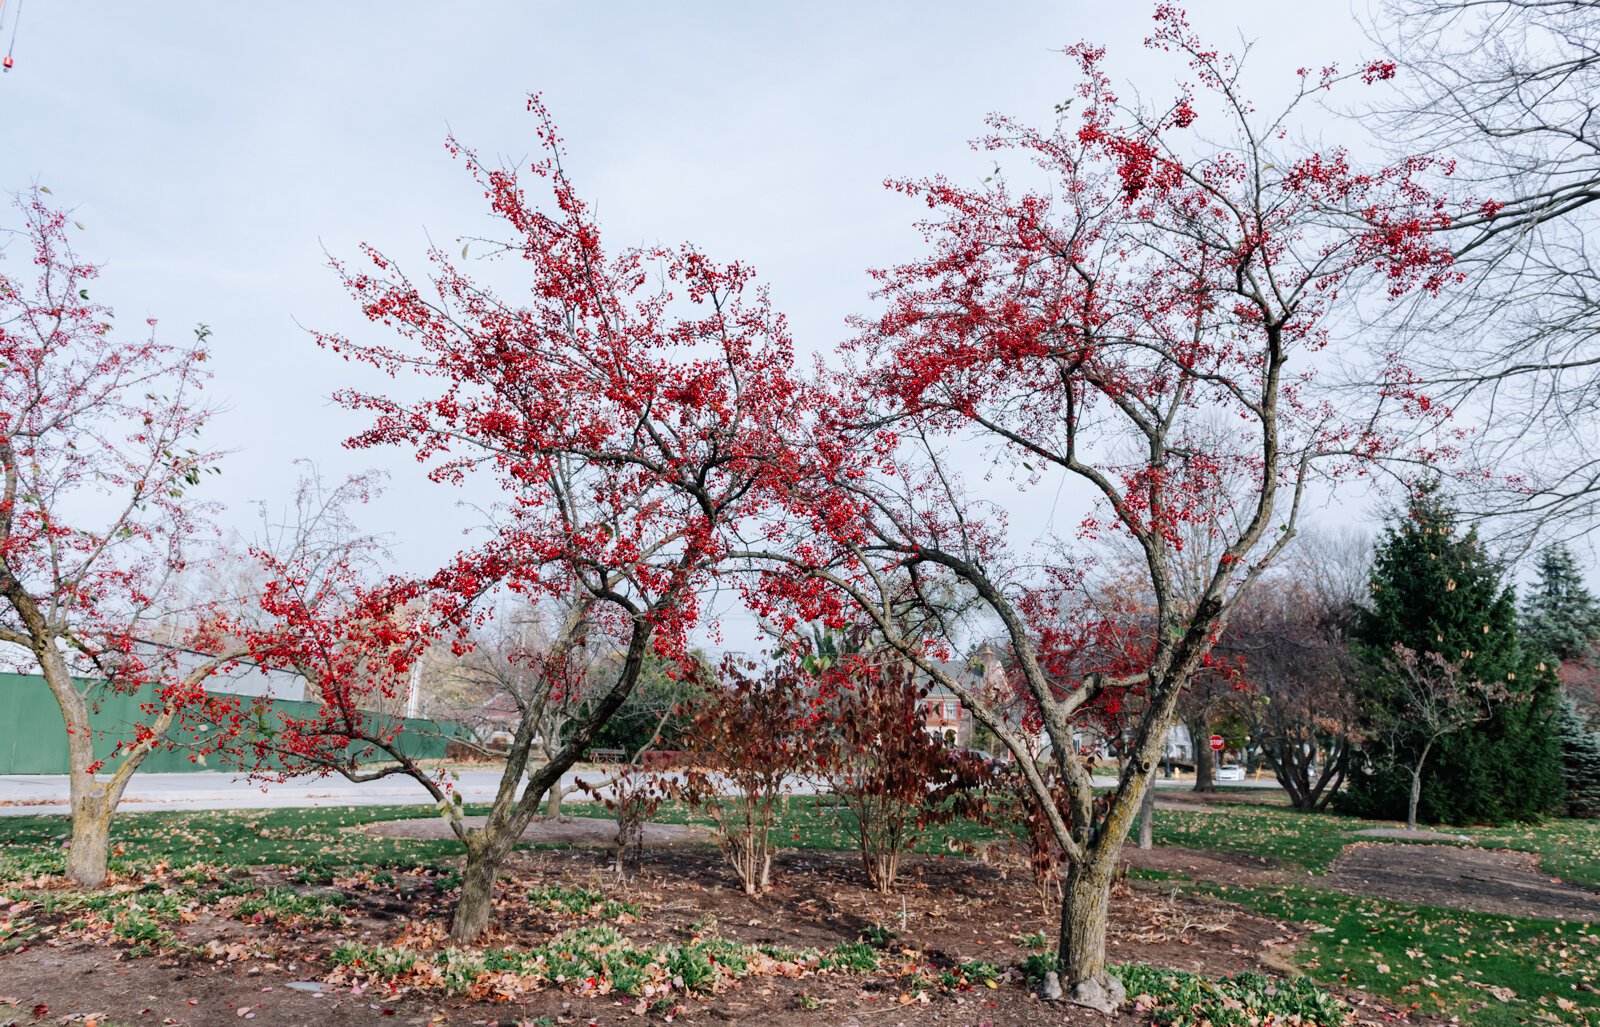 The crab apple trees at Foster Park in Fort Wayne.